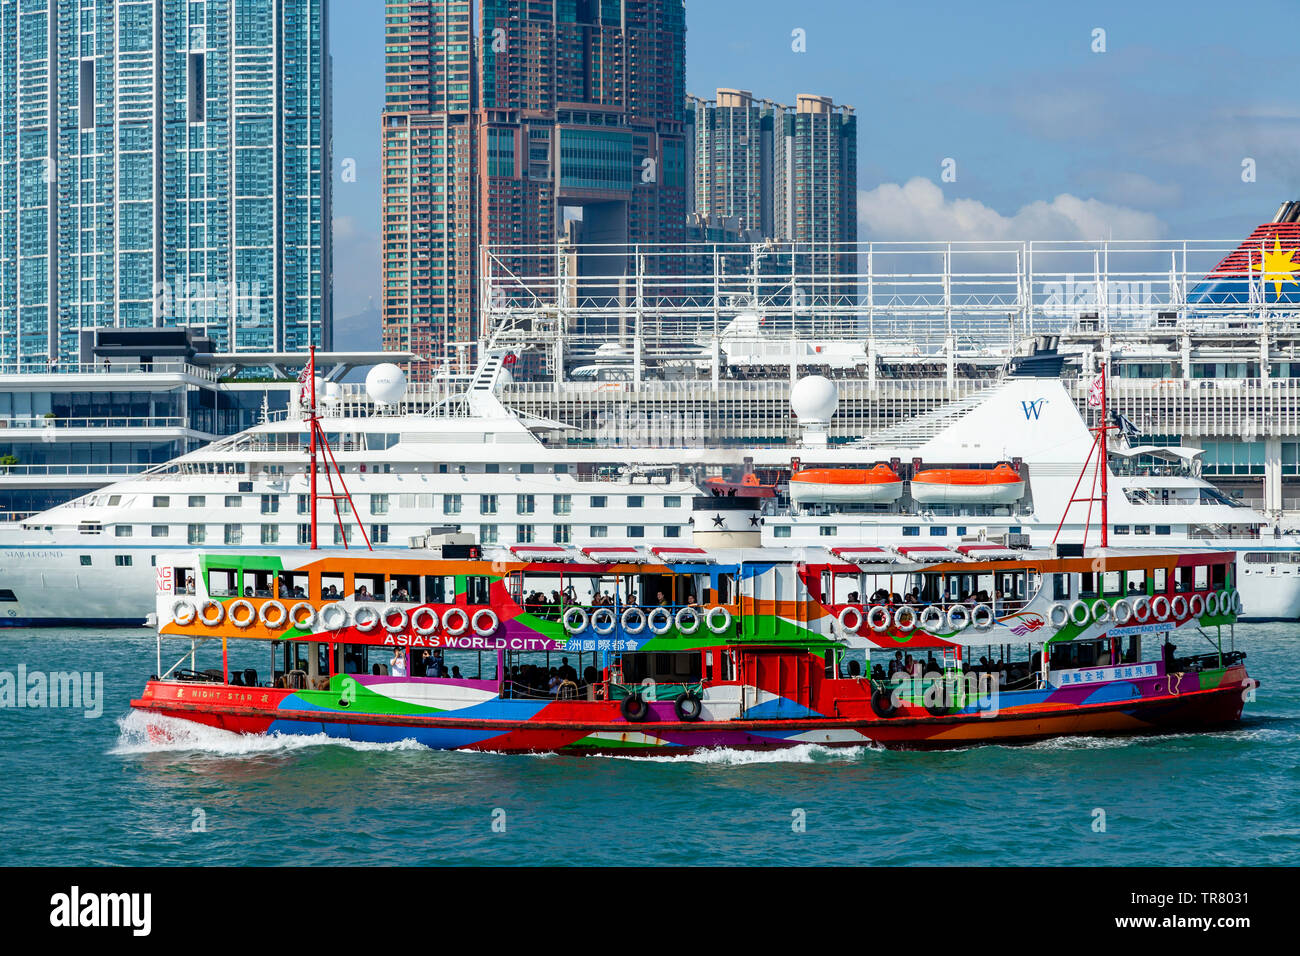 A Colourful Star Ferry In Victoria Harbour, Hong Kong, China Stock Photo